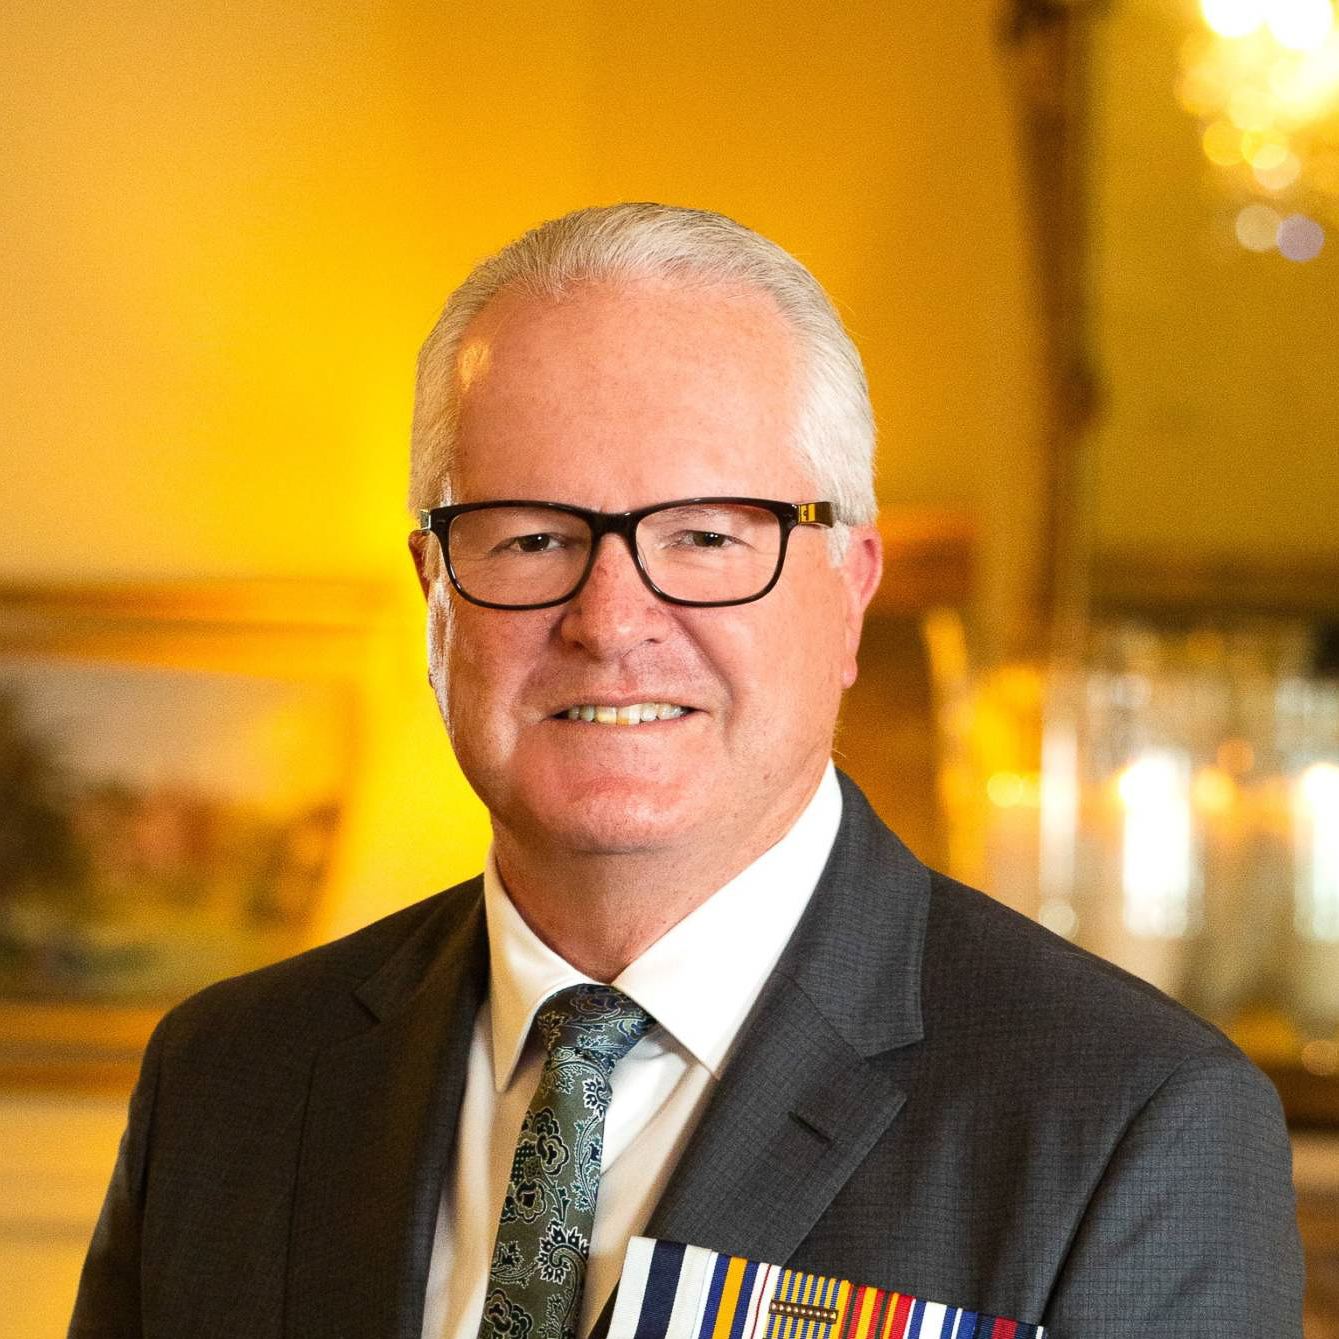 A photo of his Excellency the Honourable Chris Dawson. Chris is smiling and looking at the camera.